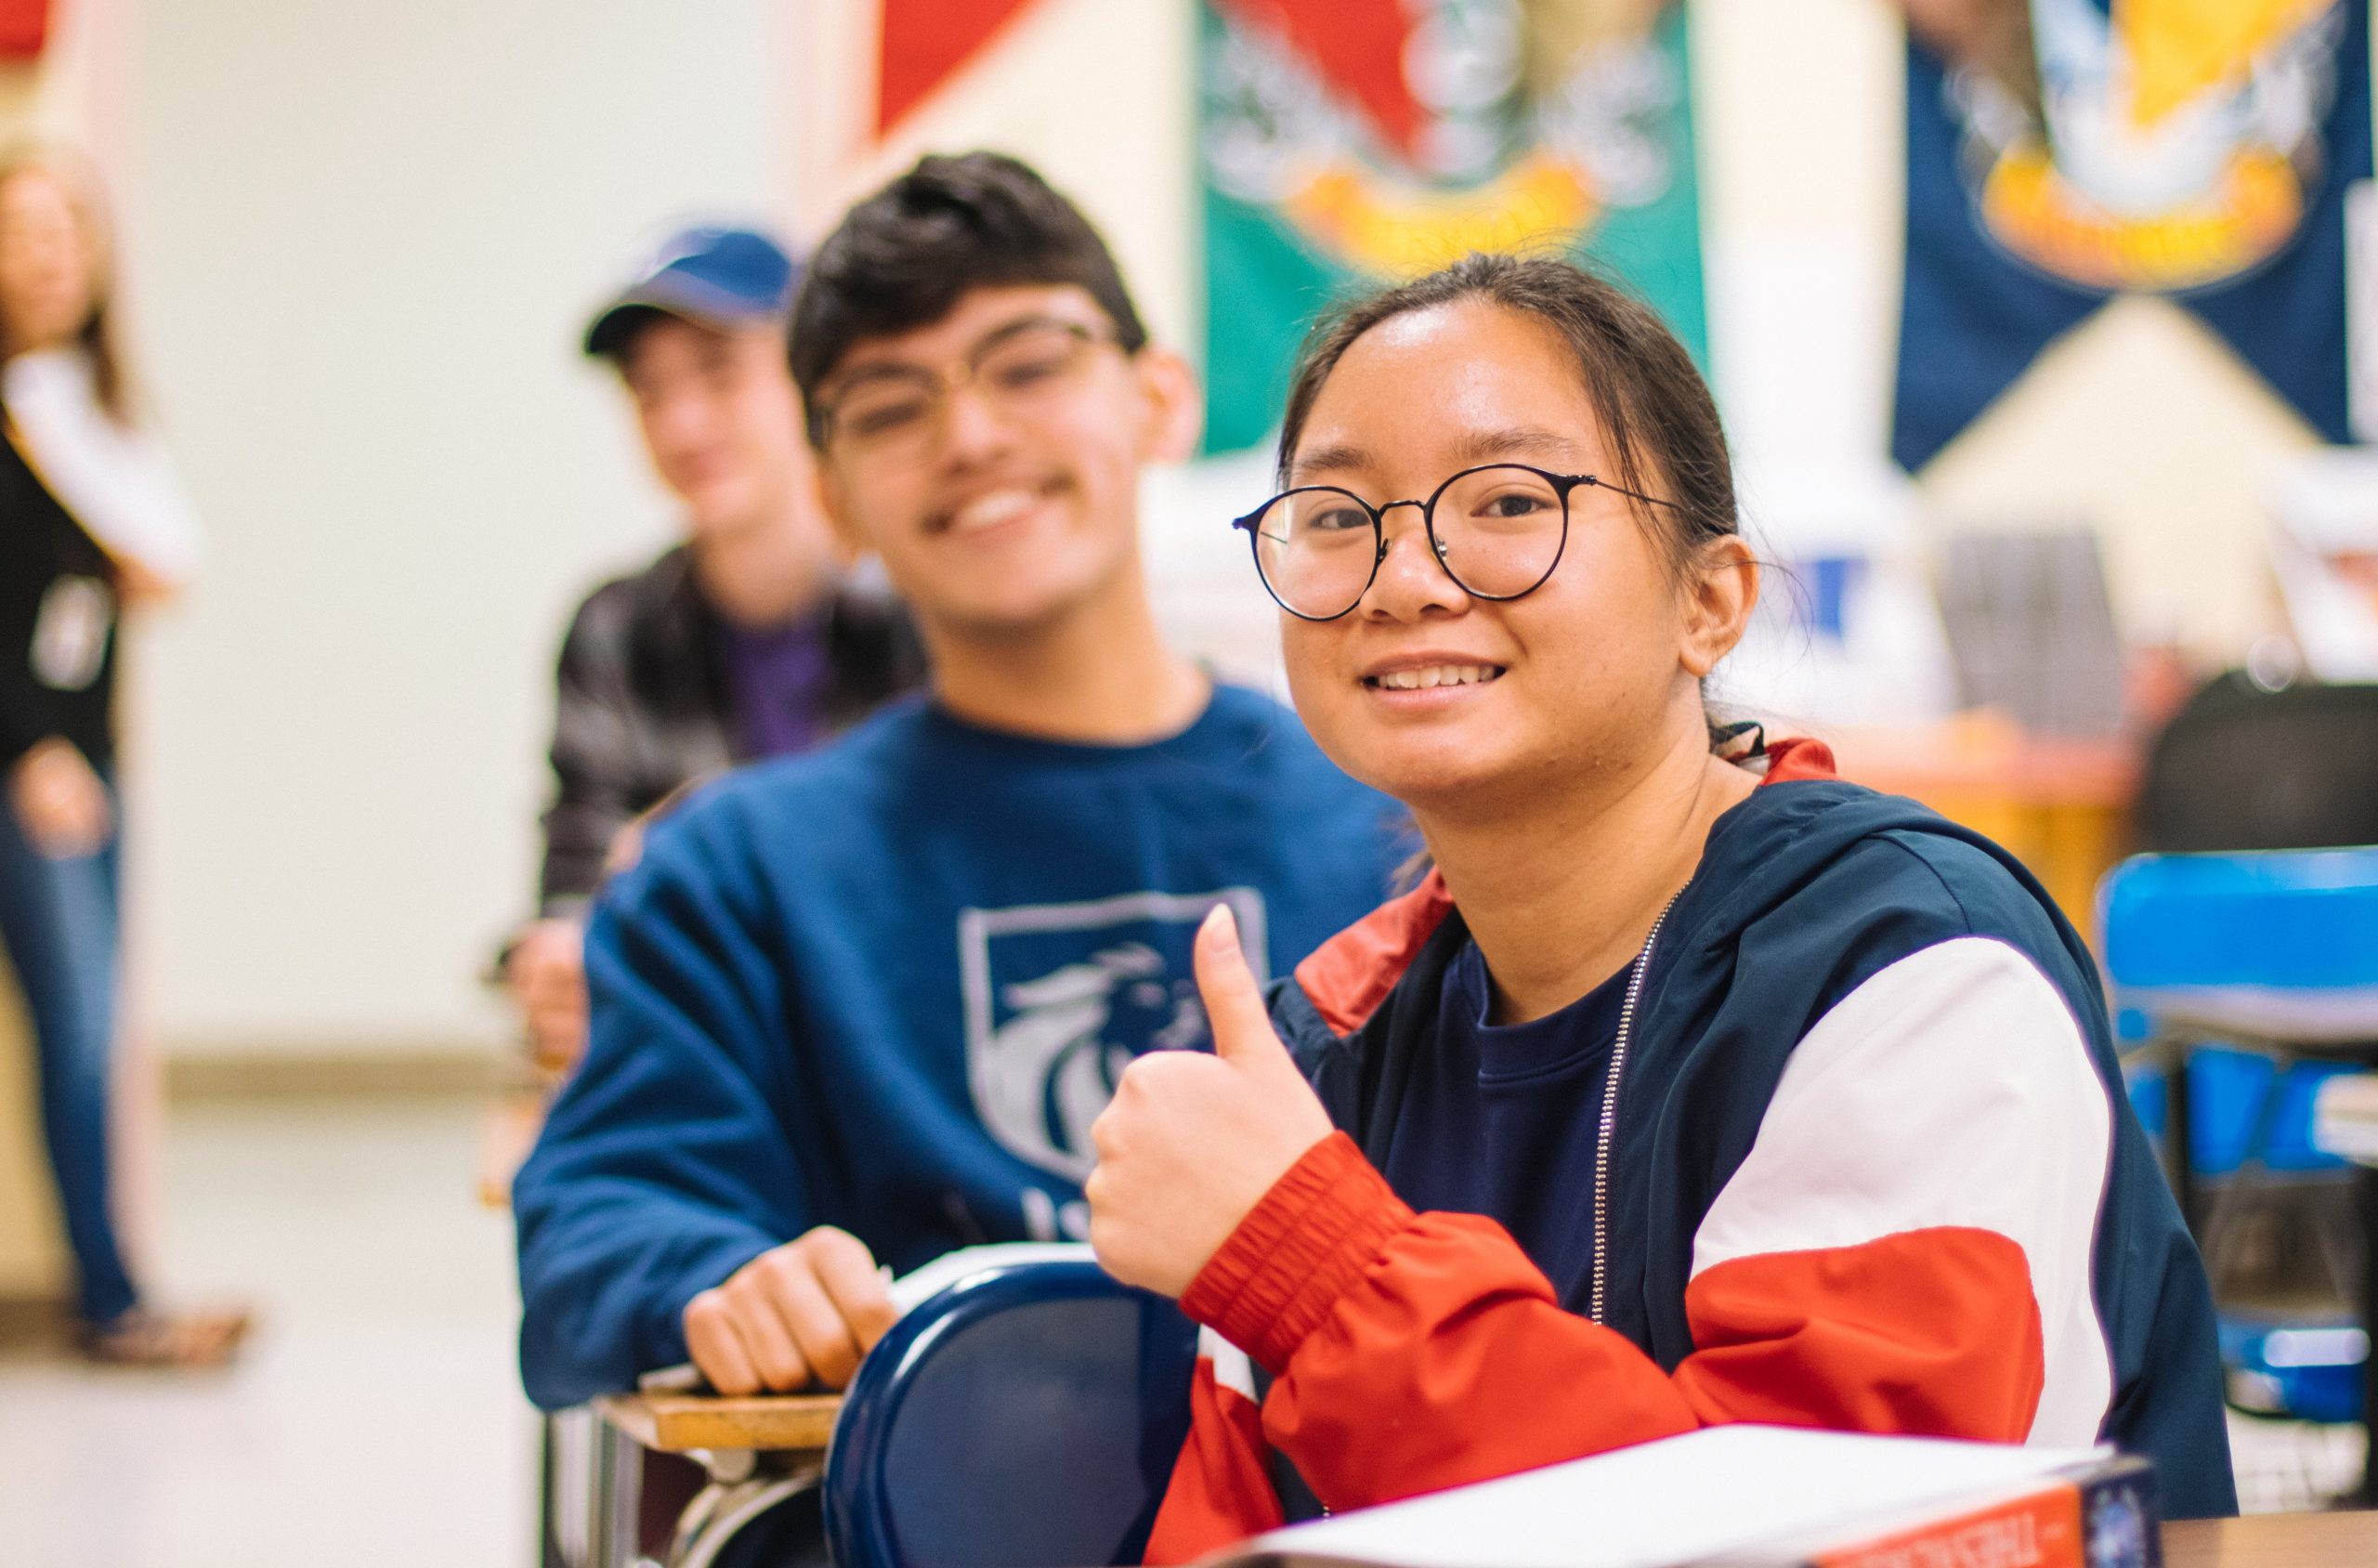 Students in class smiling